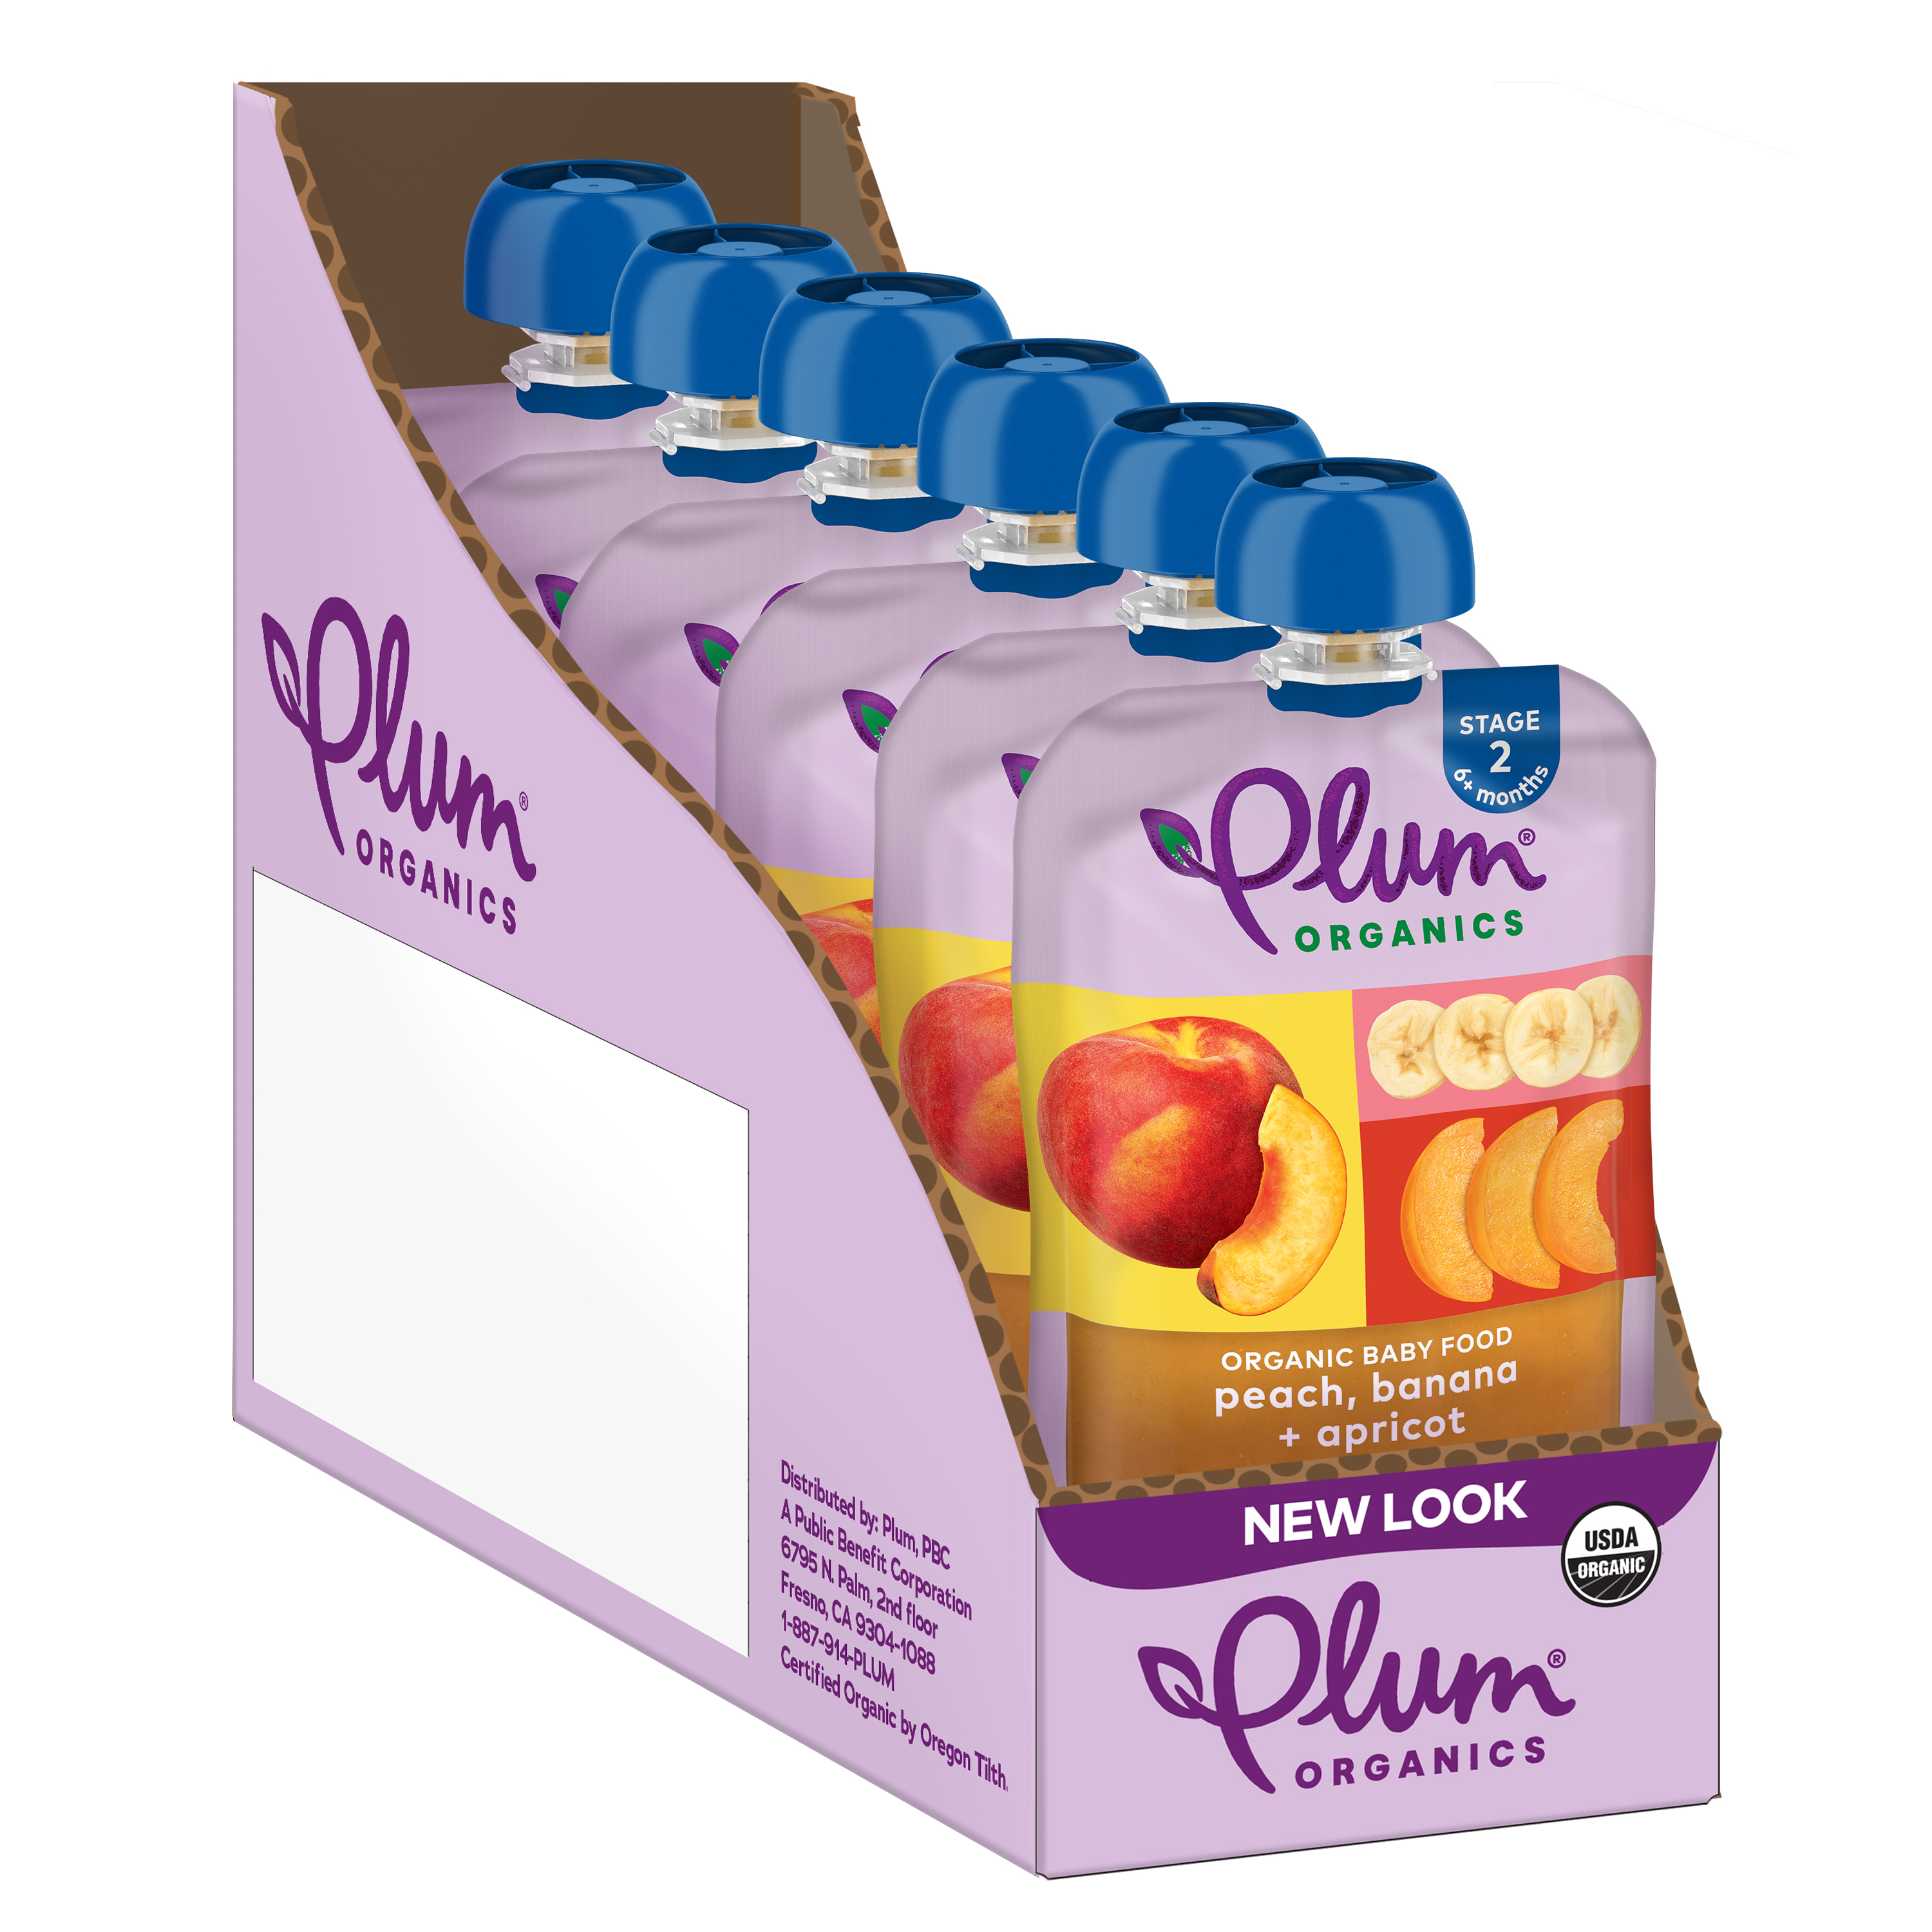 Plum Organics Stage 2 Organic Baby Food Pouches: Peach, Banana, Apricot - 4 oz, 6 Pack - image 1 of 10